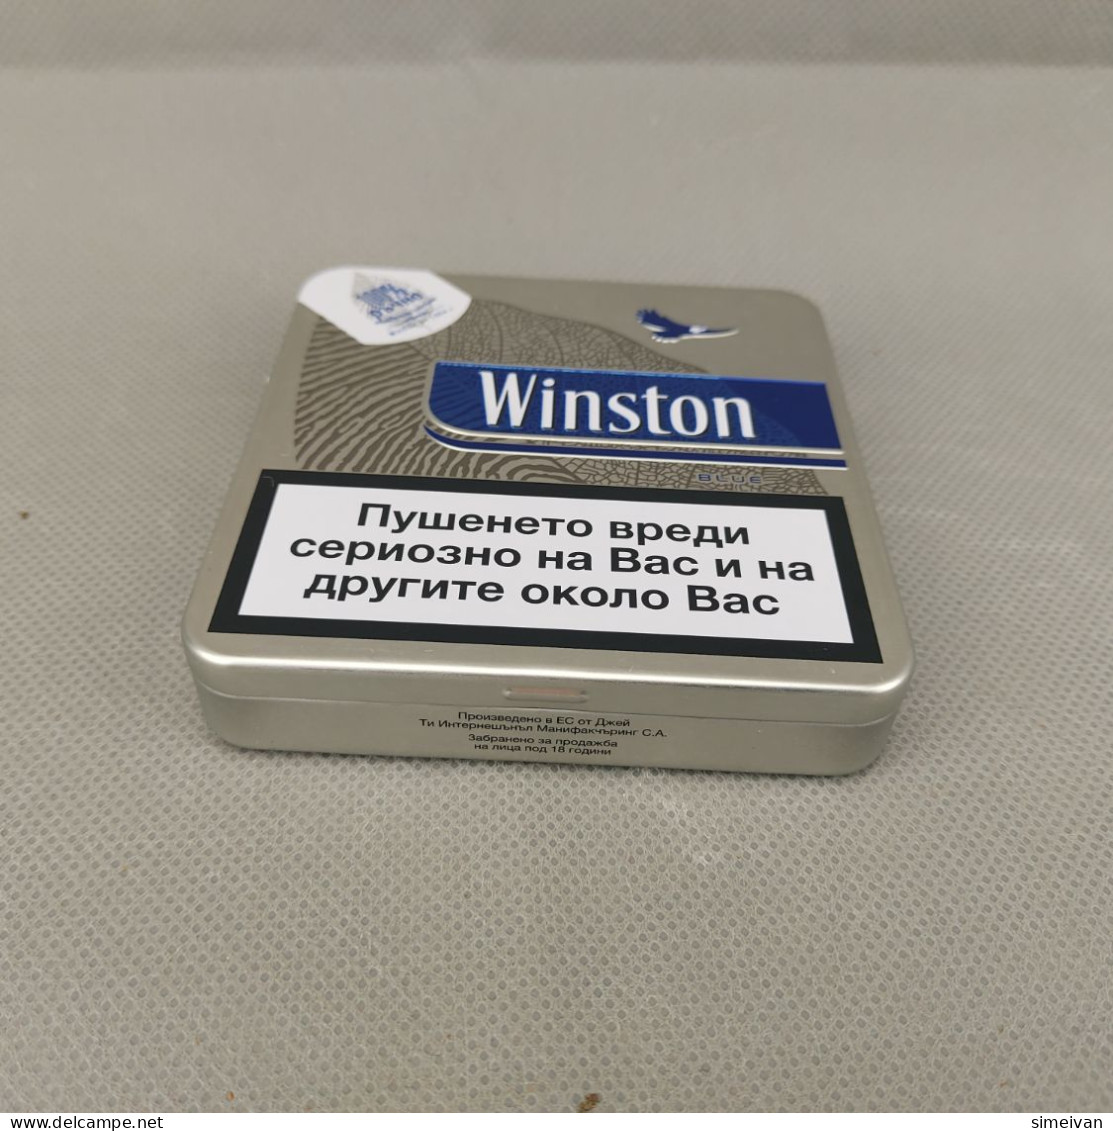 WINSTON BLUE METAL BOX LIMITED EDITION Empty Bulgarian Edition #1960 - Advertising Items